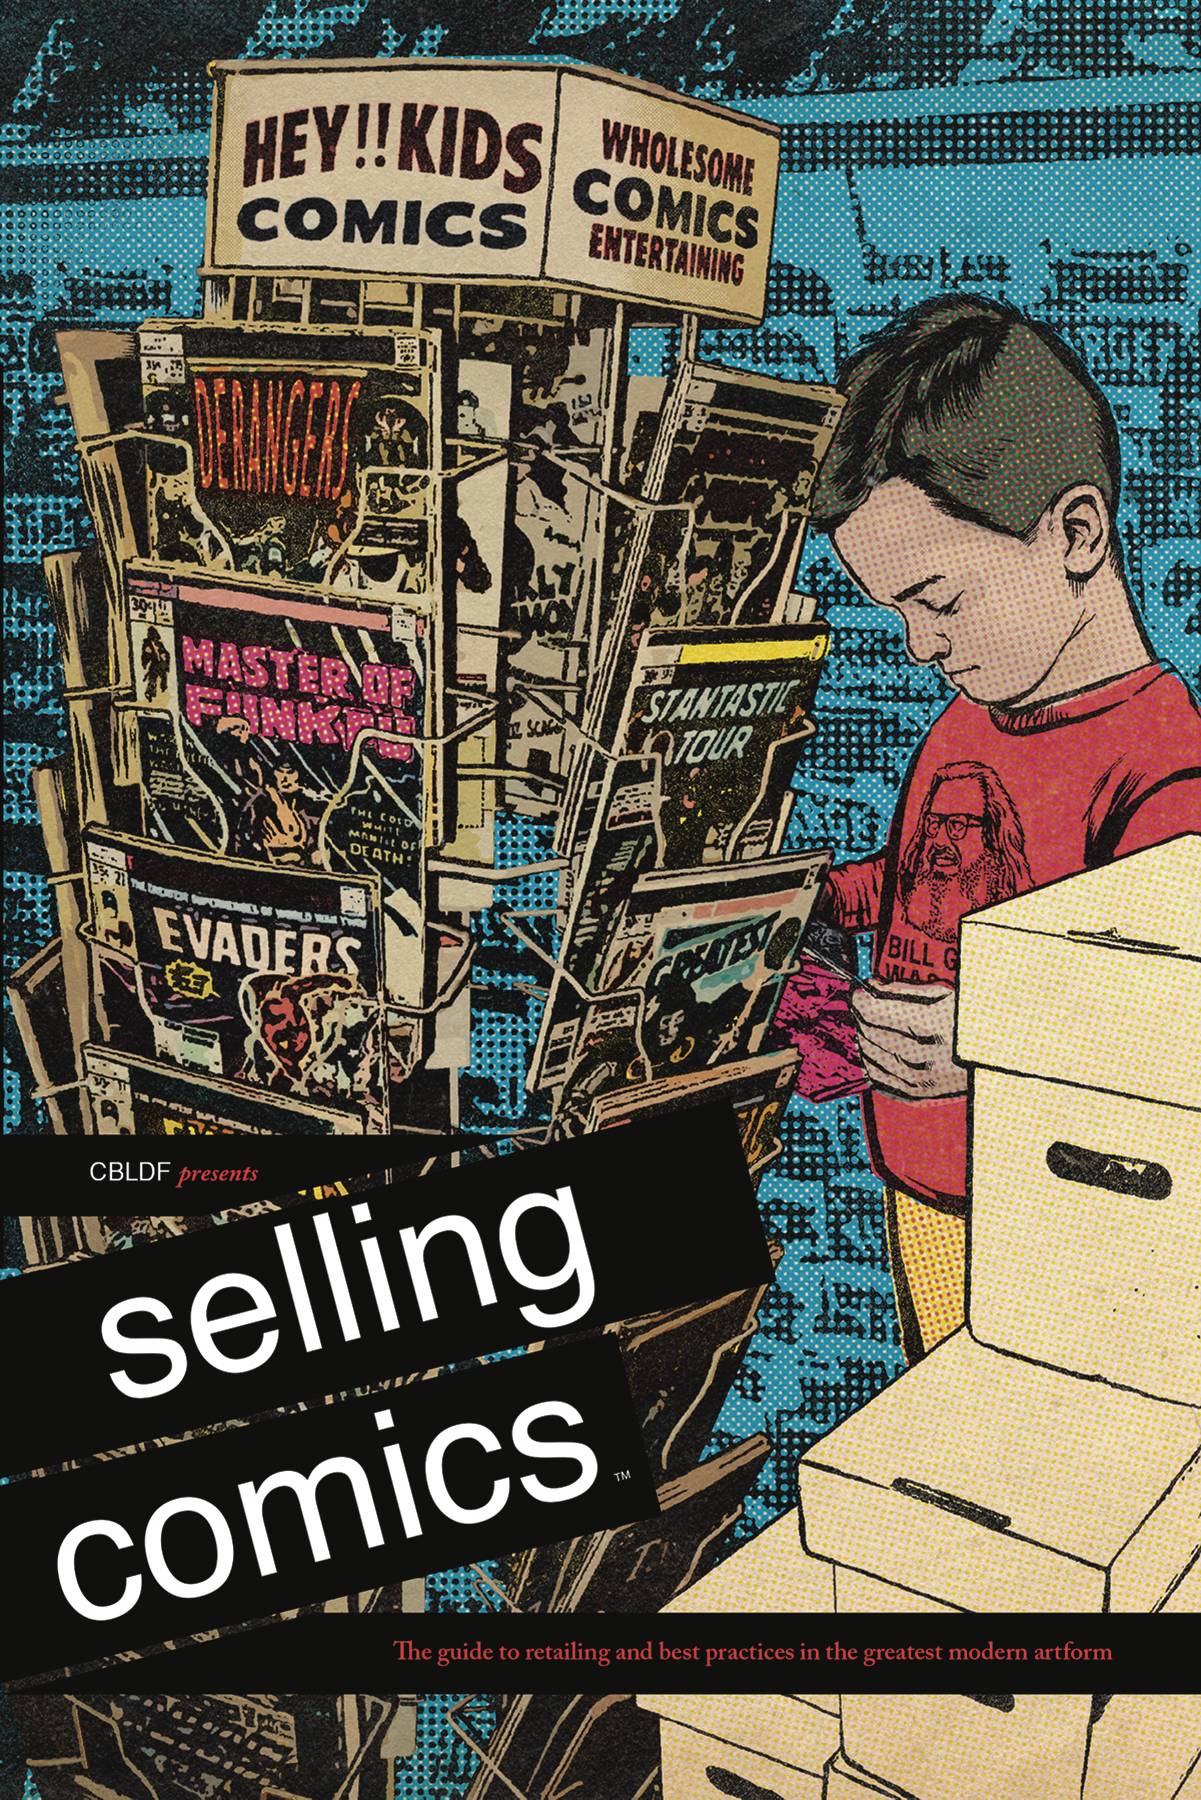 CBLDF Presents Selling Comics Graphic Novel Guide To Retailing